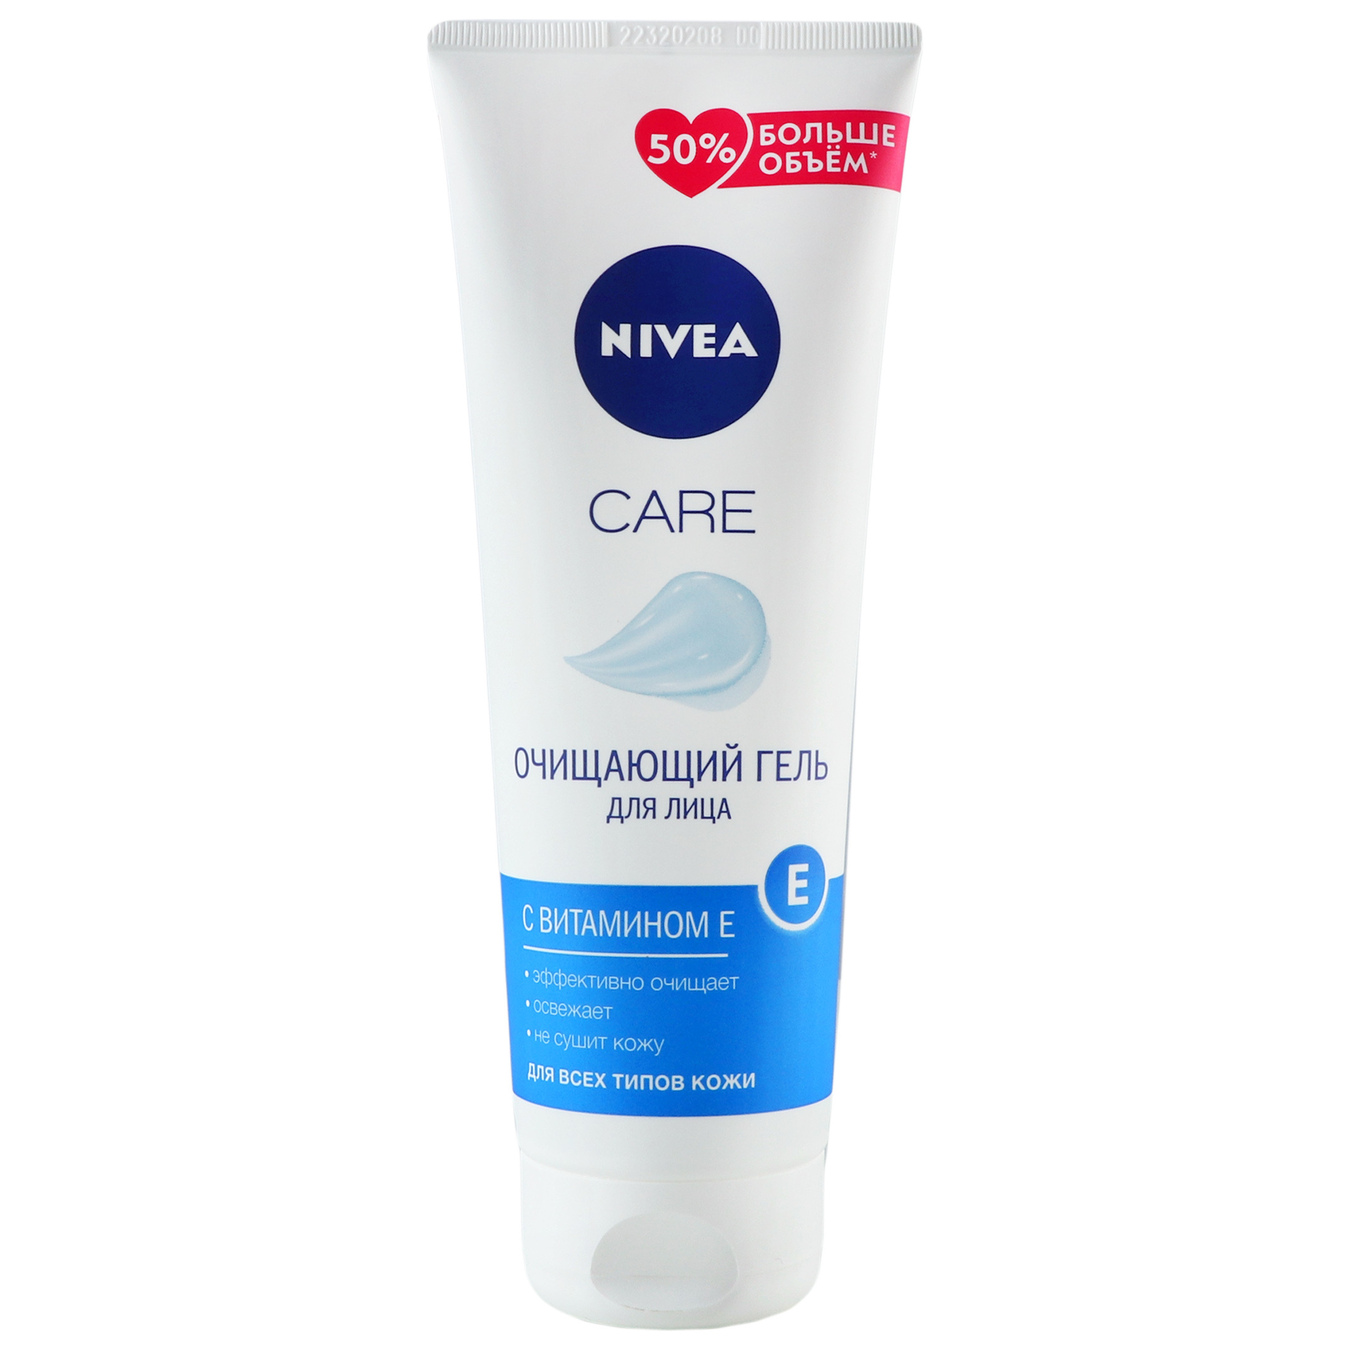 Nivea face cleansing gel with vitamin E 225 ml